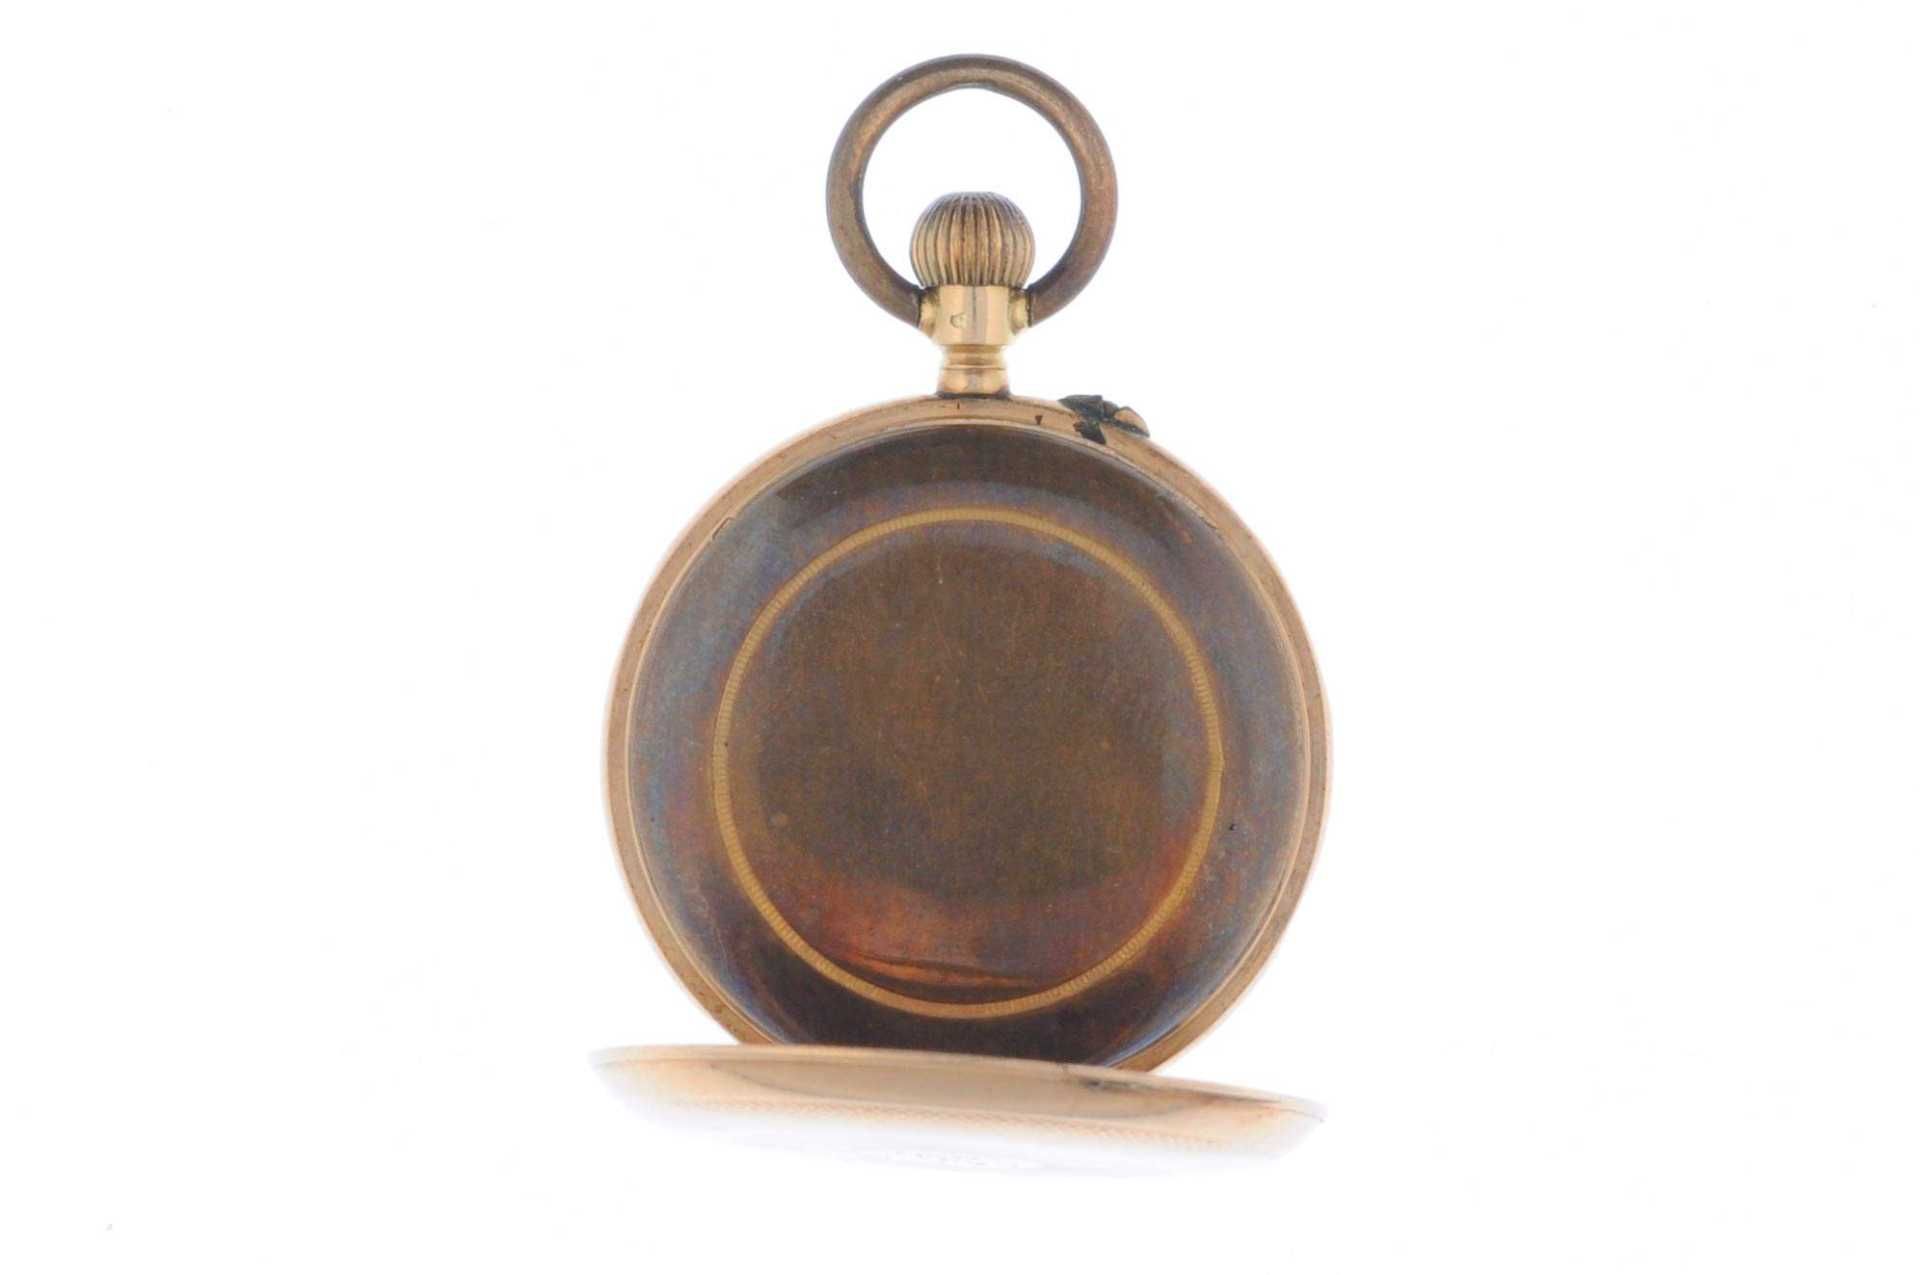 Pocket-watch Kollmar & Jourdan. Ca. 32, 2 mm, about 1880-1890, 585er Gold, gold-painted lever moveme - Image 3 of 5